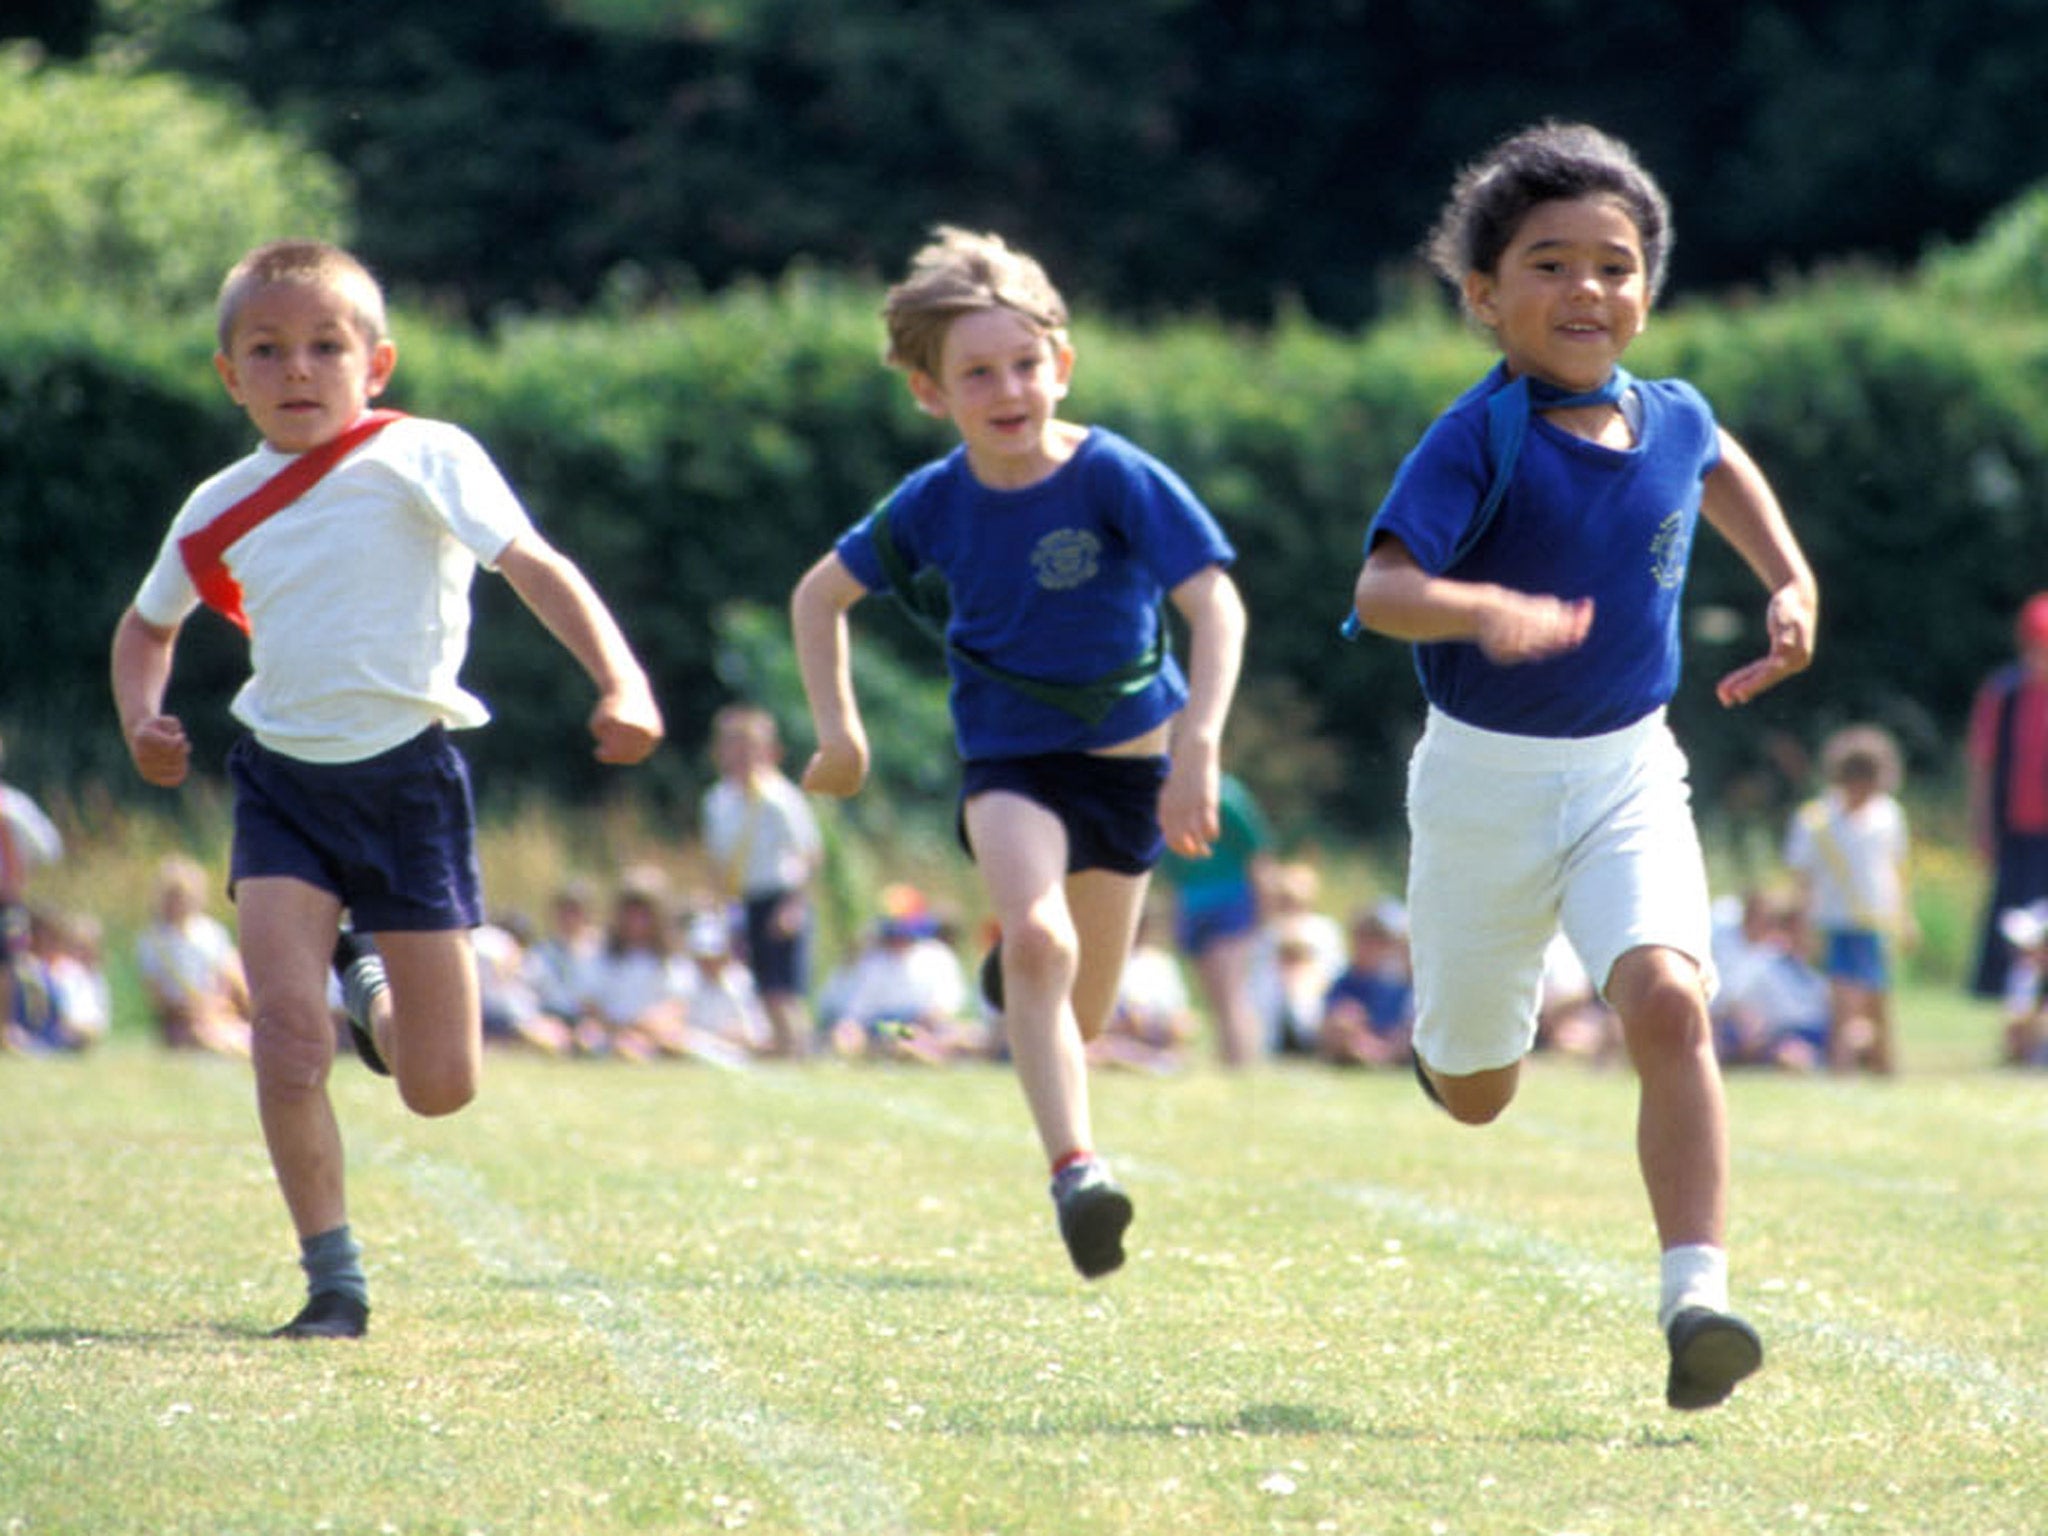 Ofsted say children are being let down in PE lessons